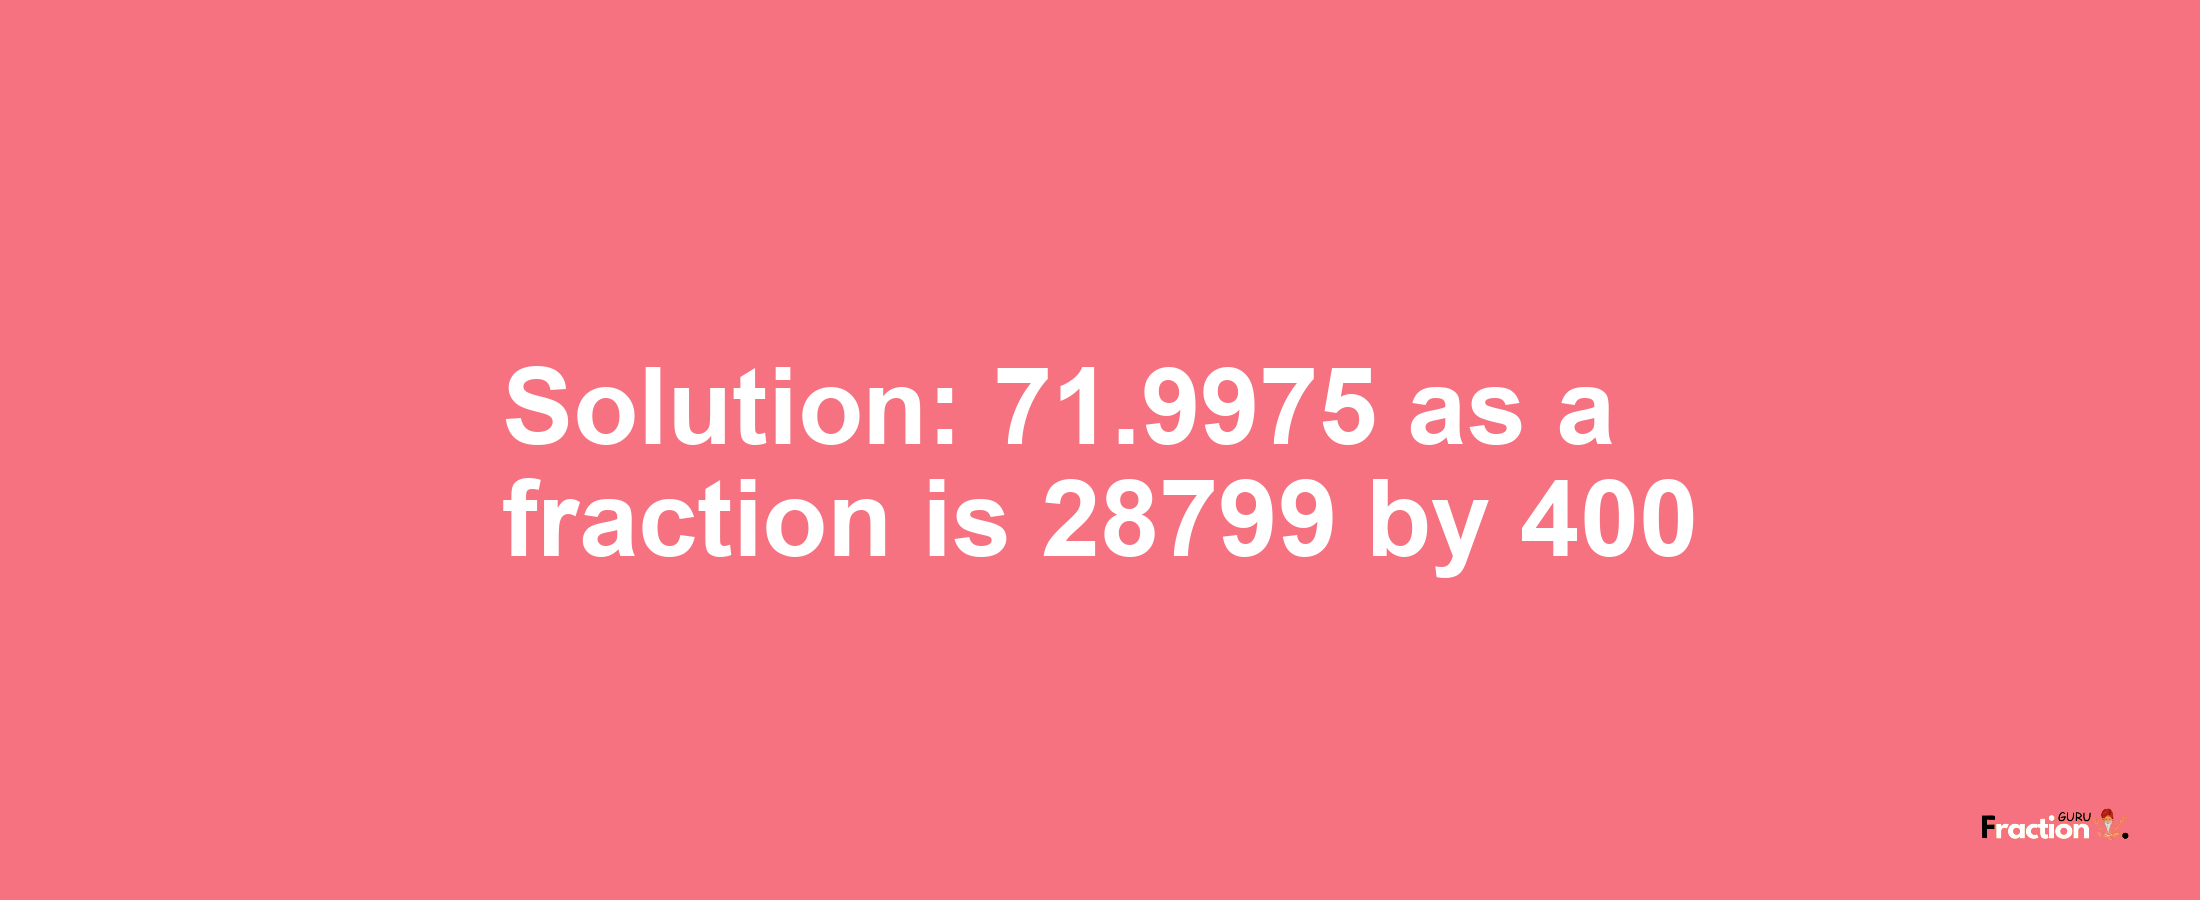 Solution:71.9975 as a fraction is 28799/400